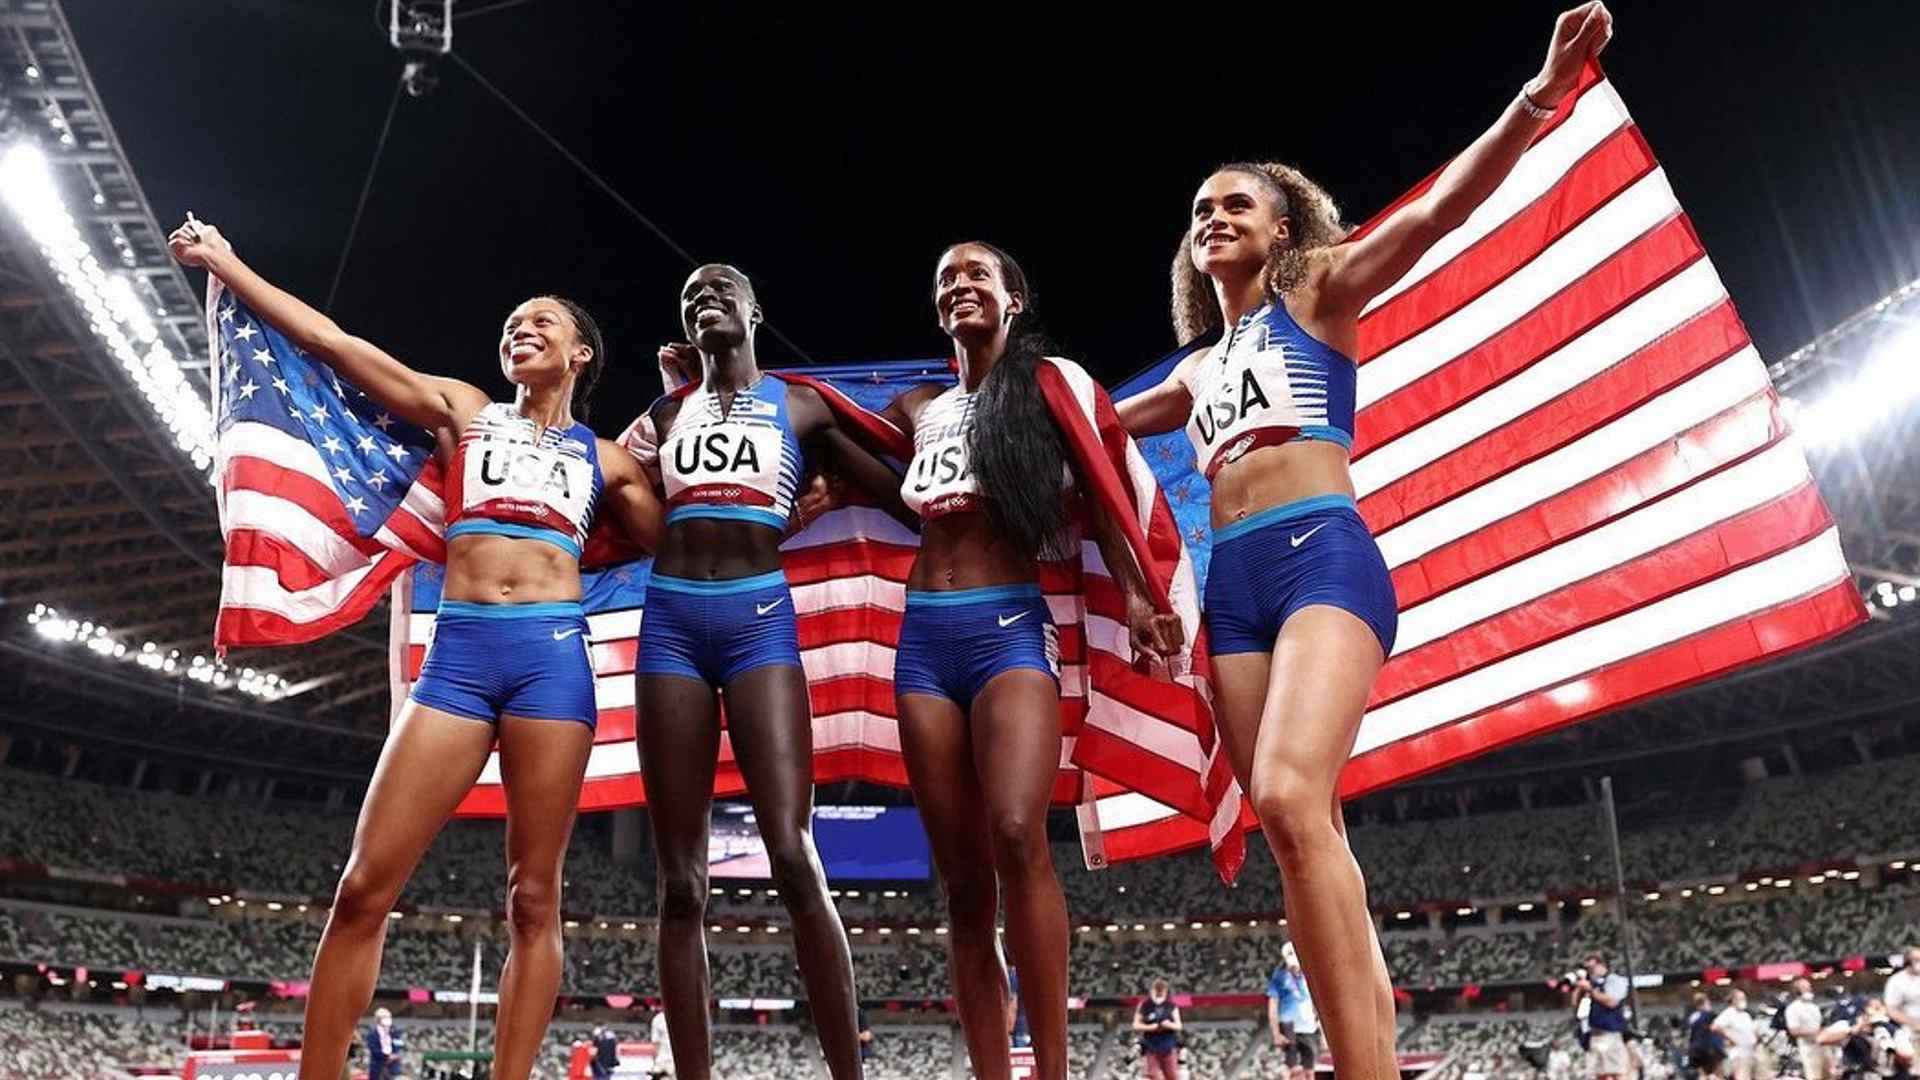 Athing Mu alongside the United States' 4 X 400m relay team comprising Sydney McLaughlin, Allyson Felix and Dalilah Muhammad after winning the gold medal at Tokyo 2020 (Image Credits - Instagram/ @athiiing)